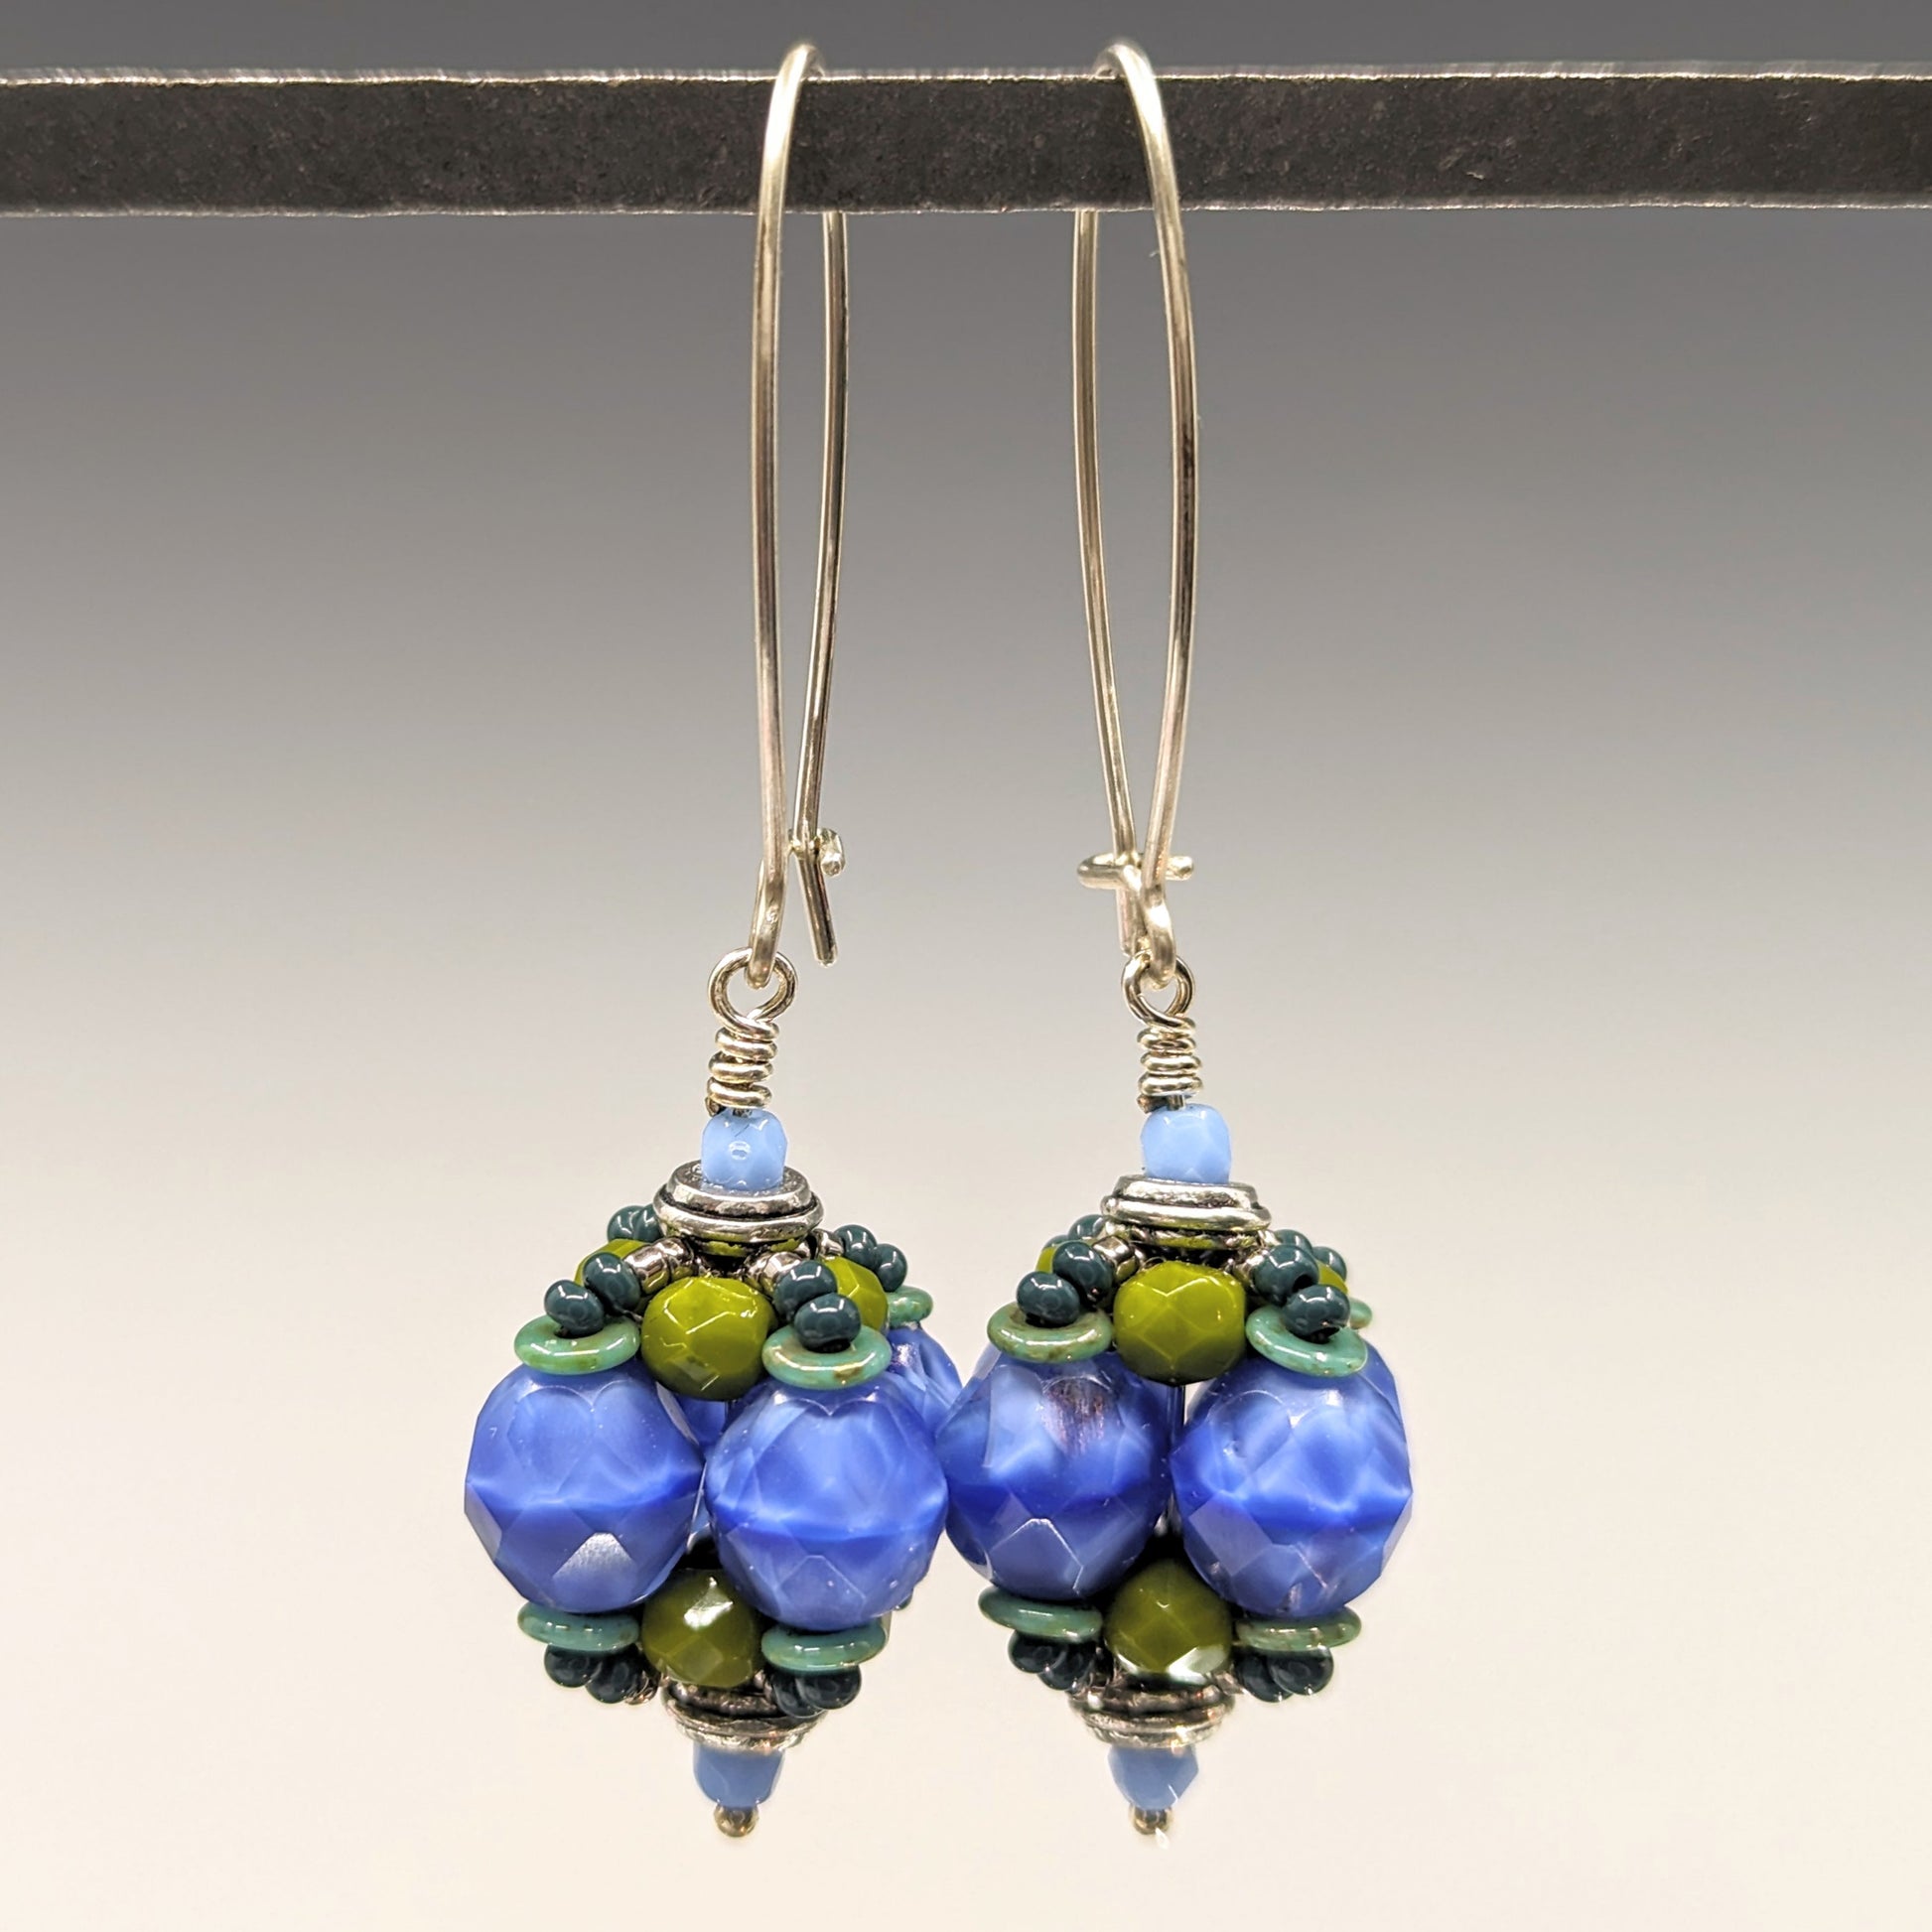 A pair of earrings hang from a black bar, against a gray background. The earrings have long silver oval wires that latch and there is a beaded ball dangling from the bottom that is made from swirly blue, avocado green and speckled light turquoise beads. 